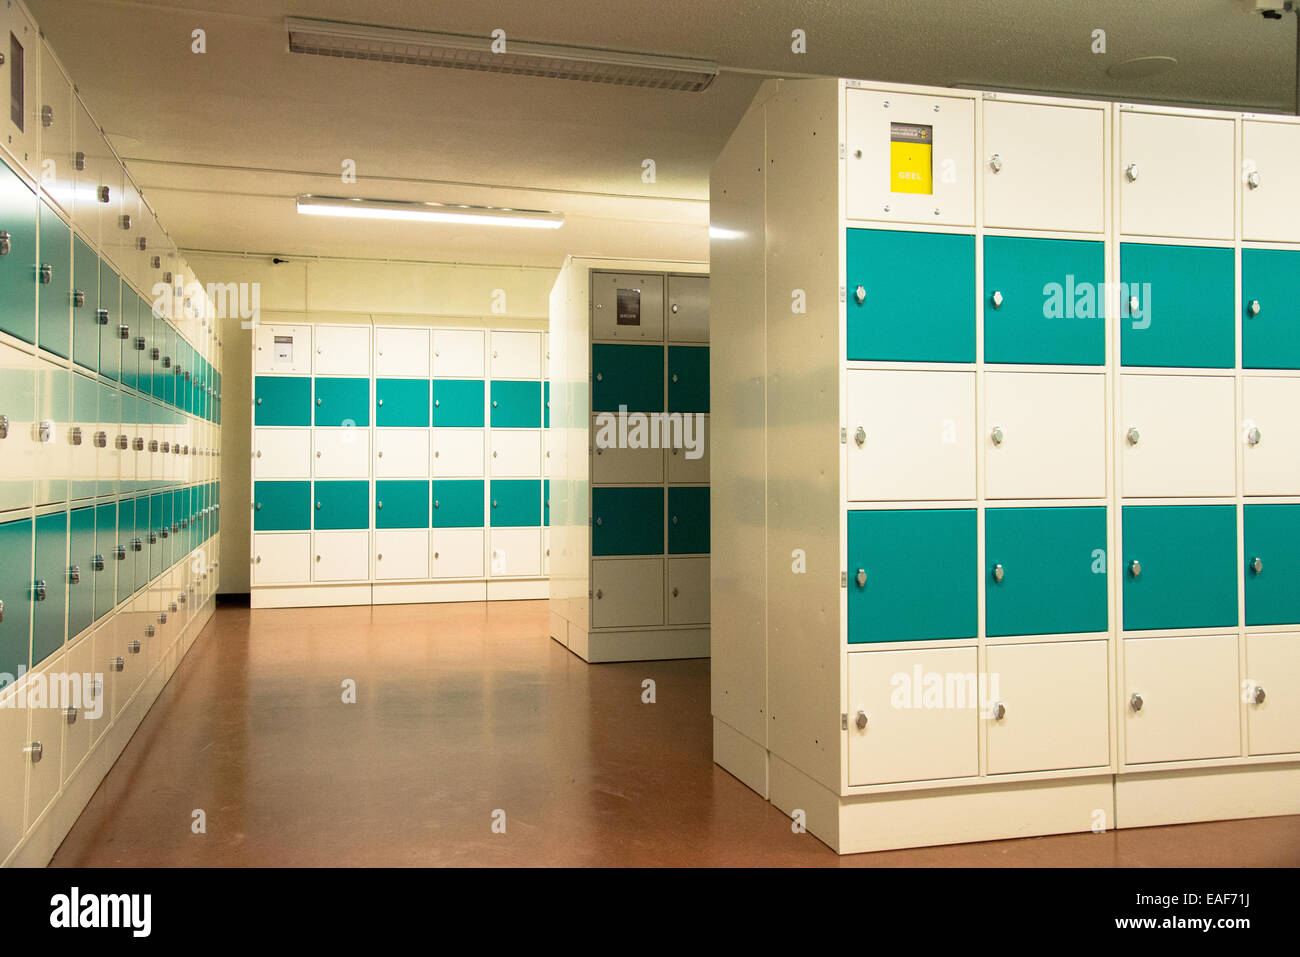 rows of automatic lockers at school Stock Photo